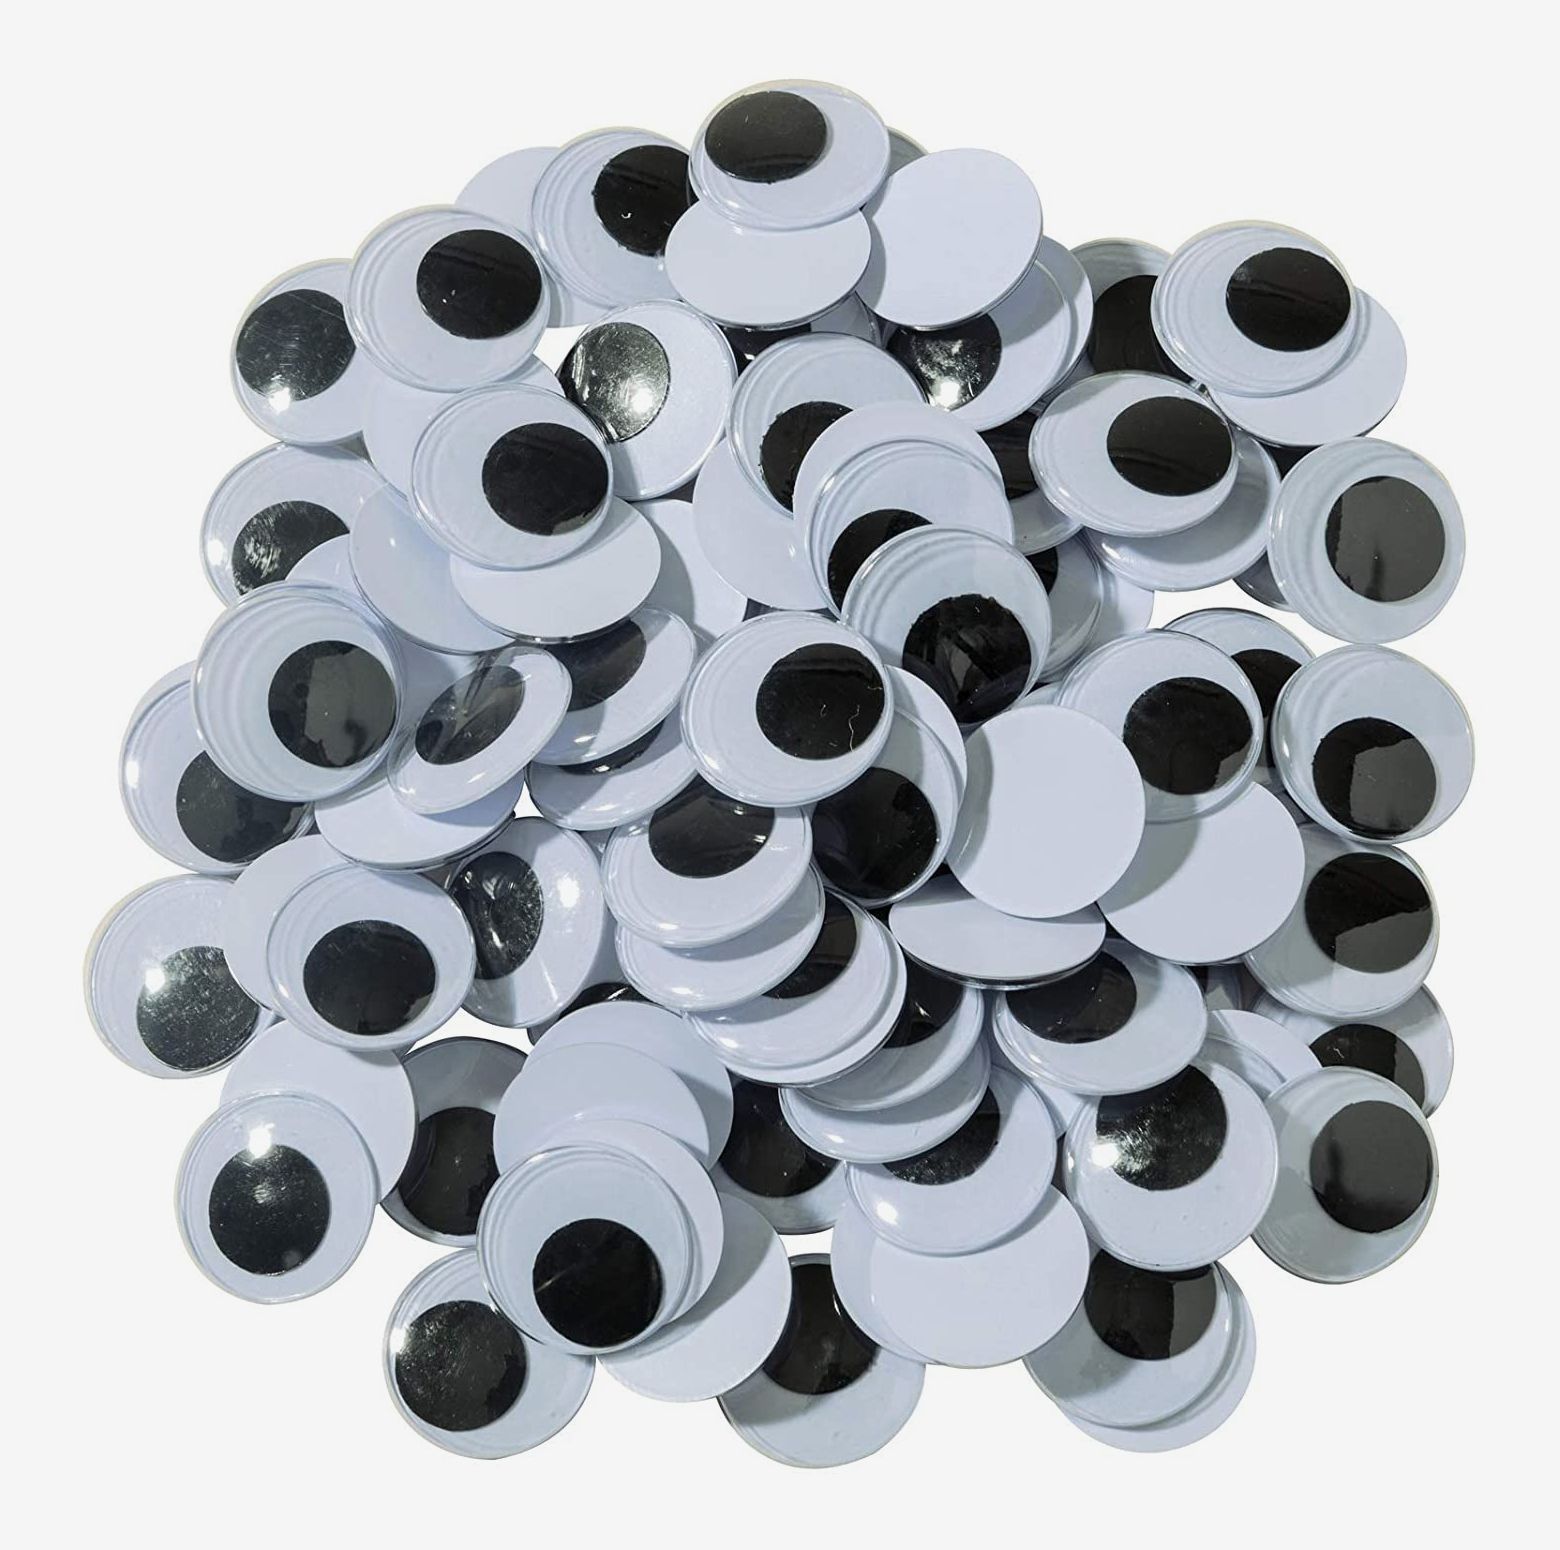 Giant Googly Eyes Stickers